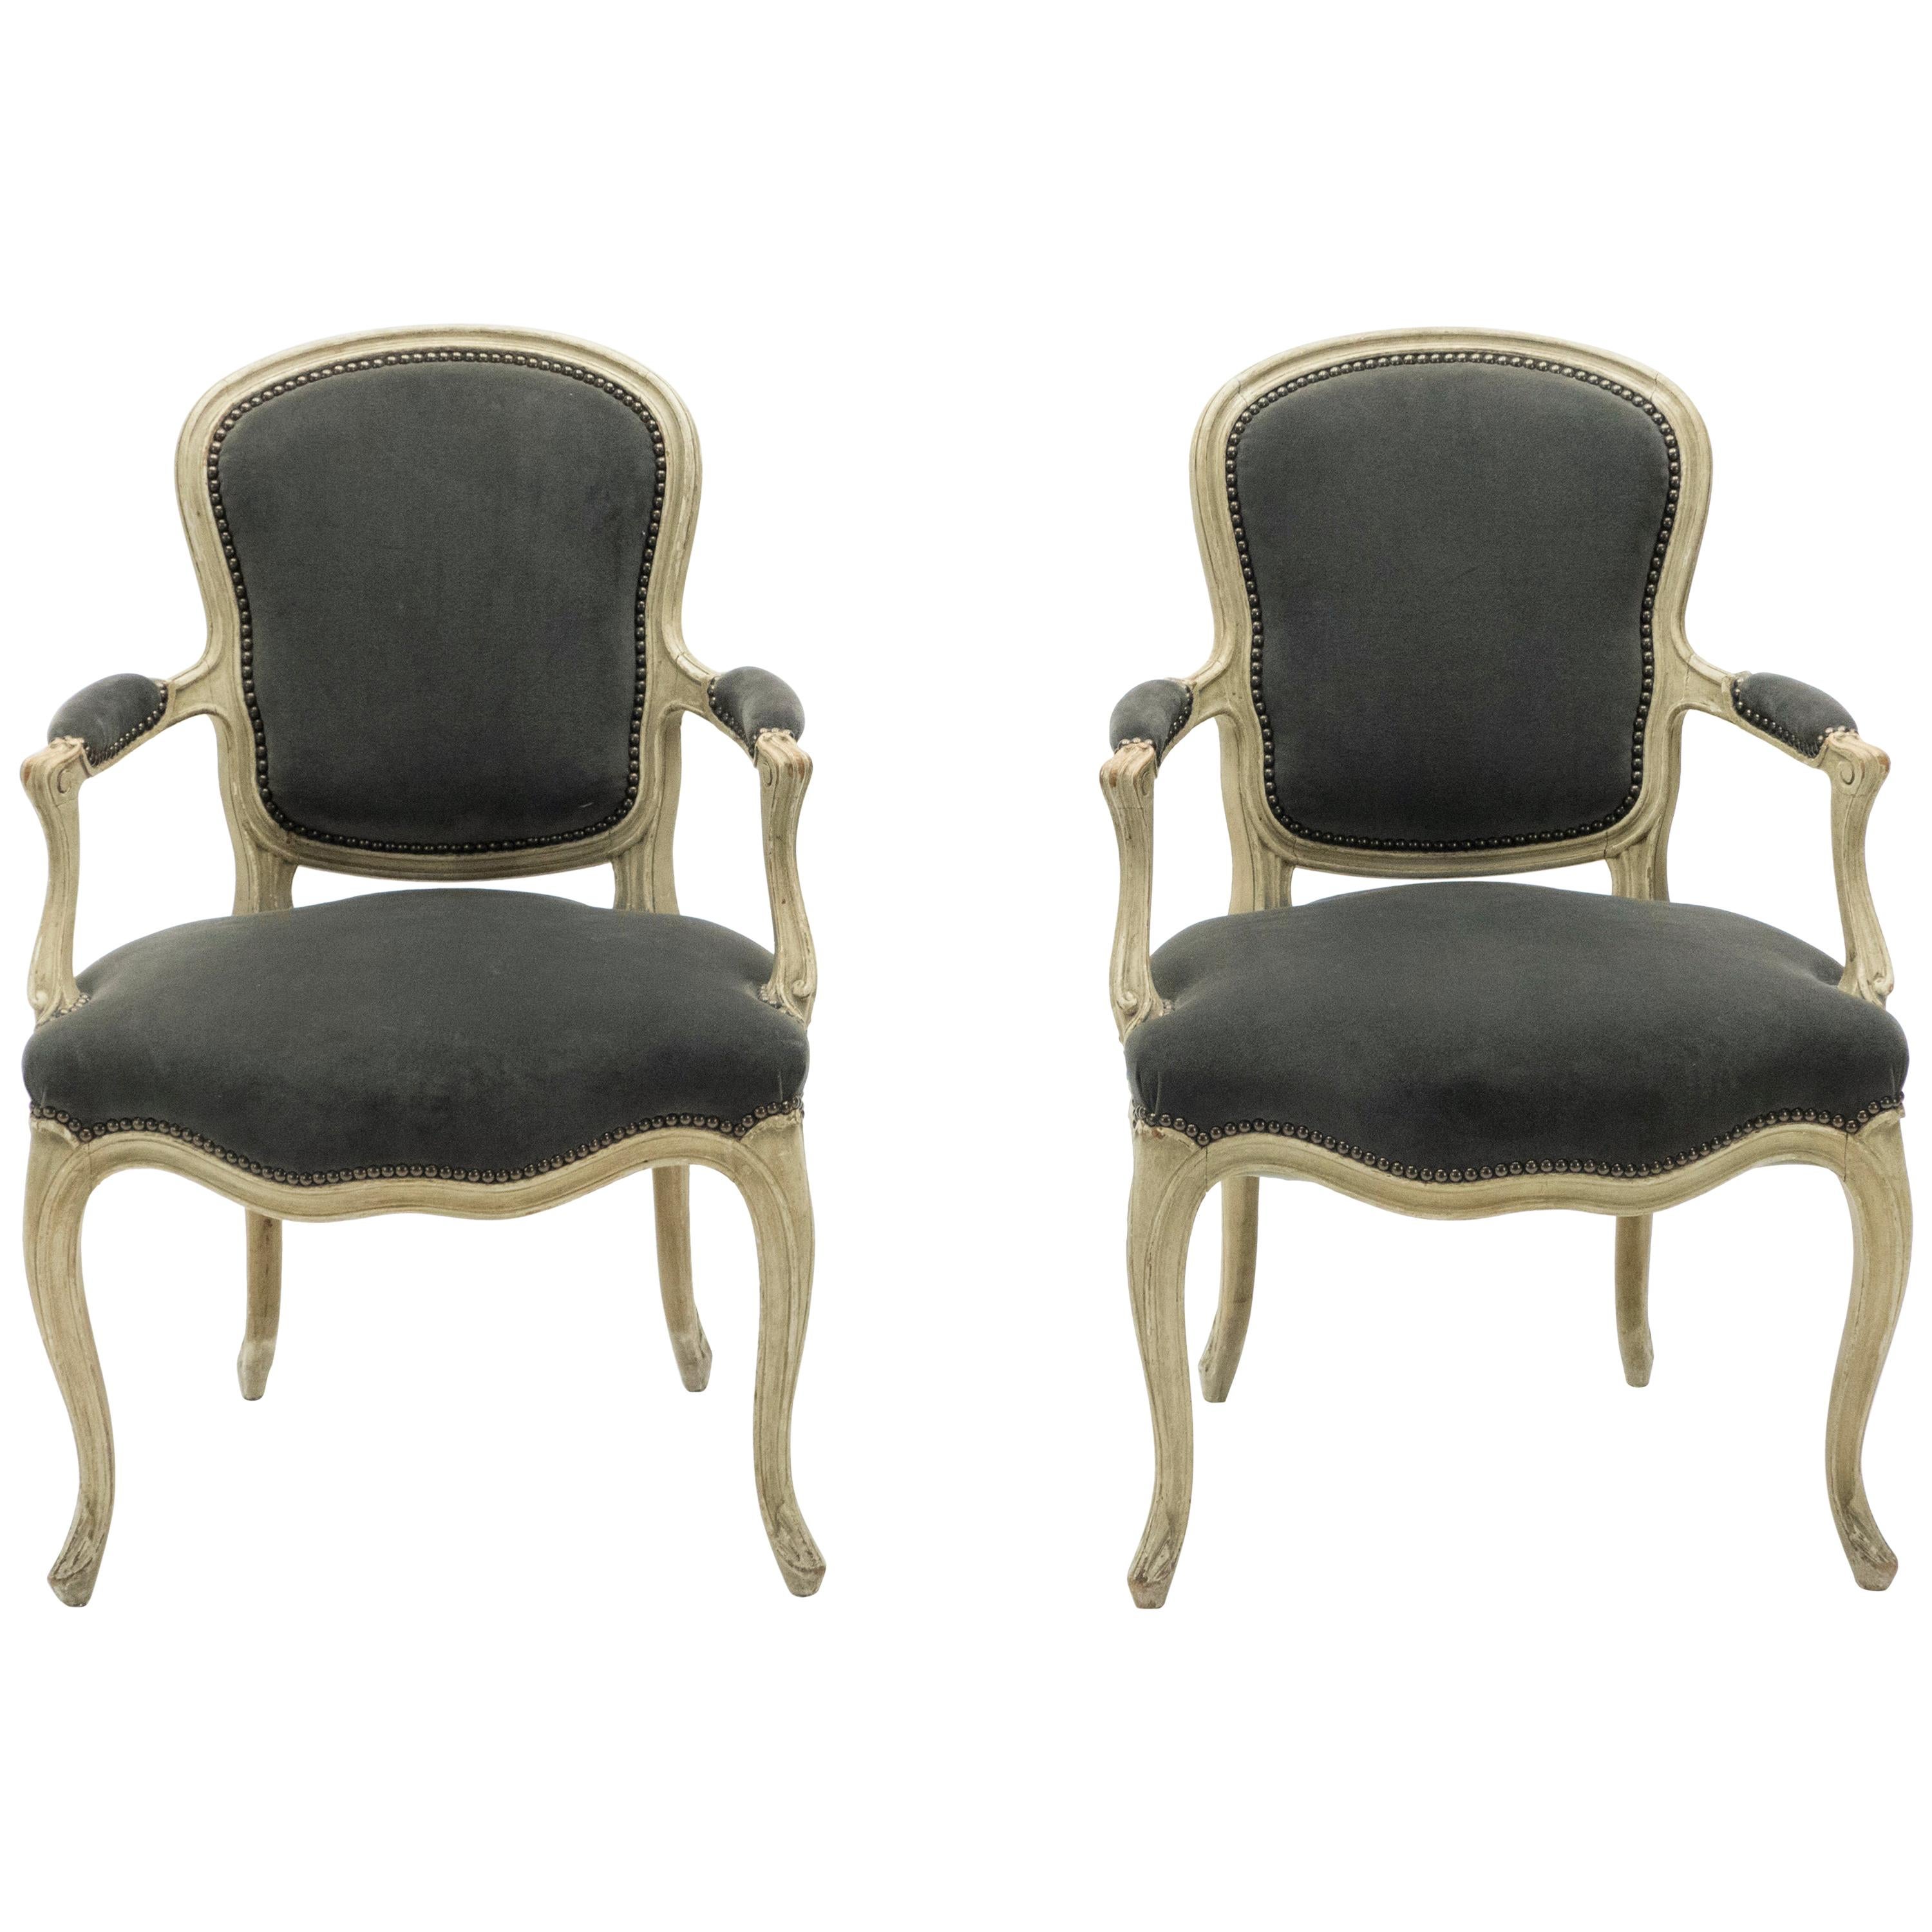 Rare Pair of Stamped Maison Jansen Louis XV Neoclassical Armchairs, 1940s For Sale